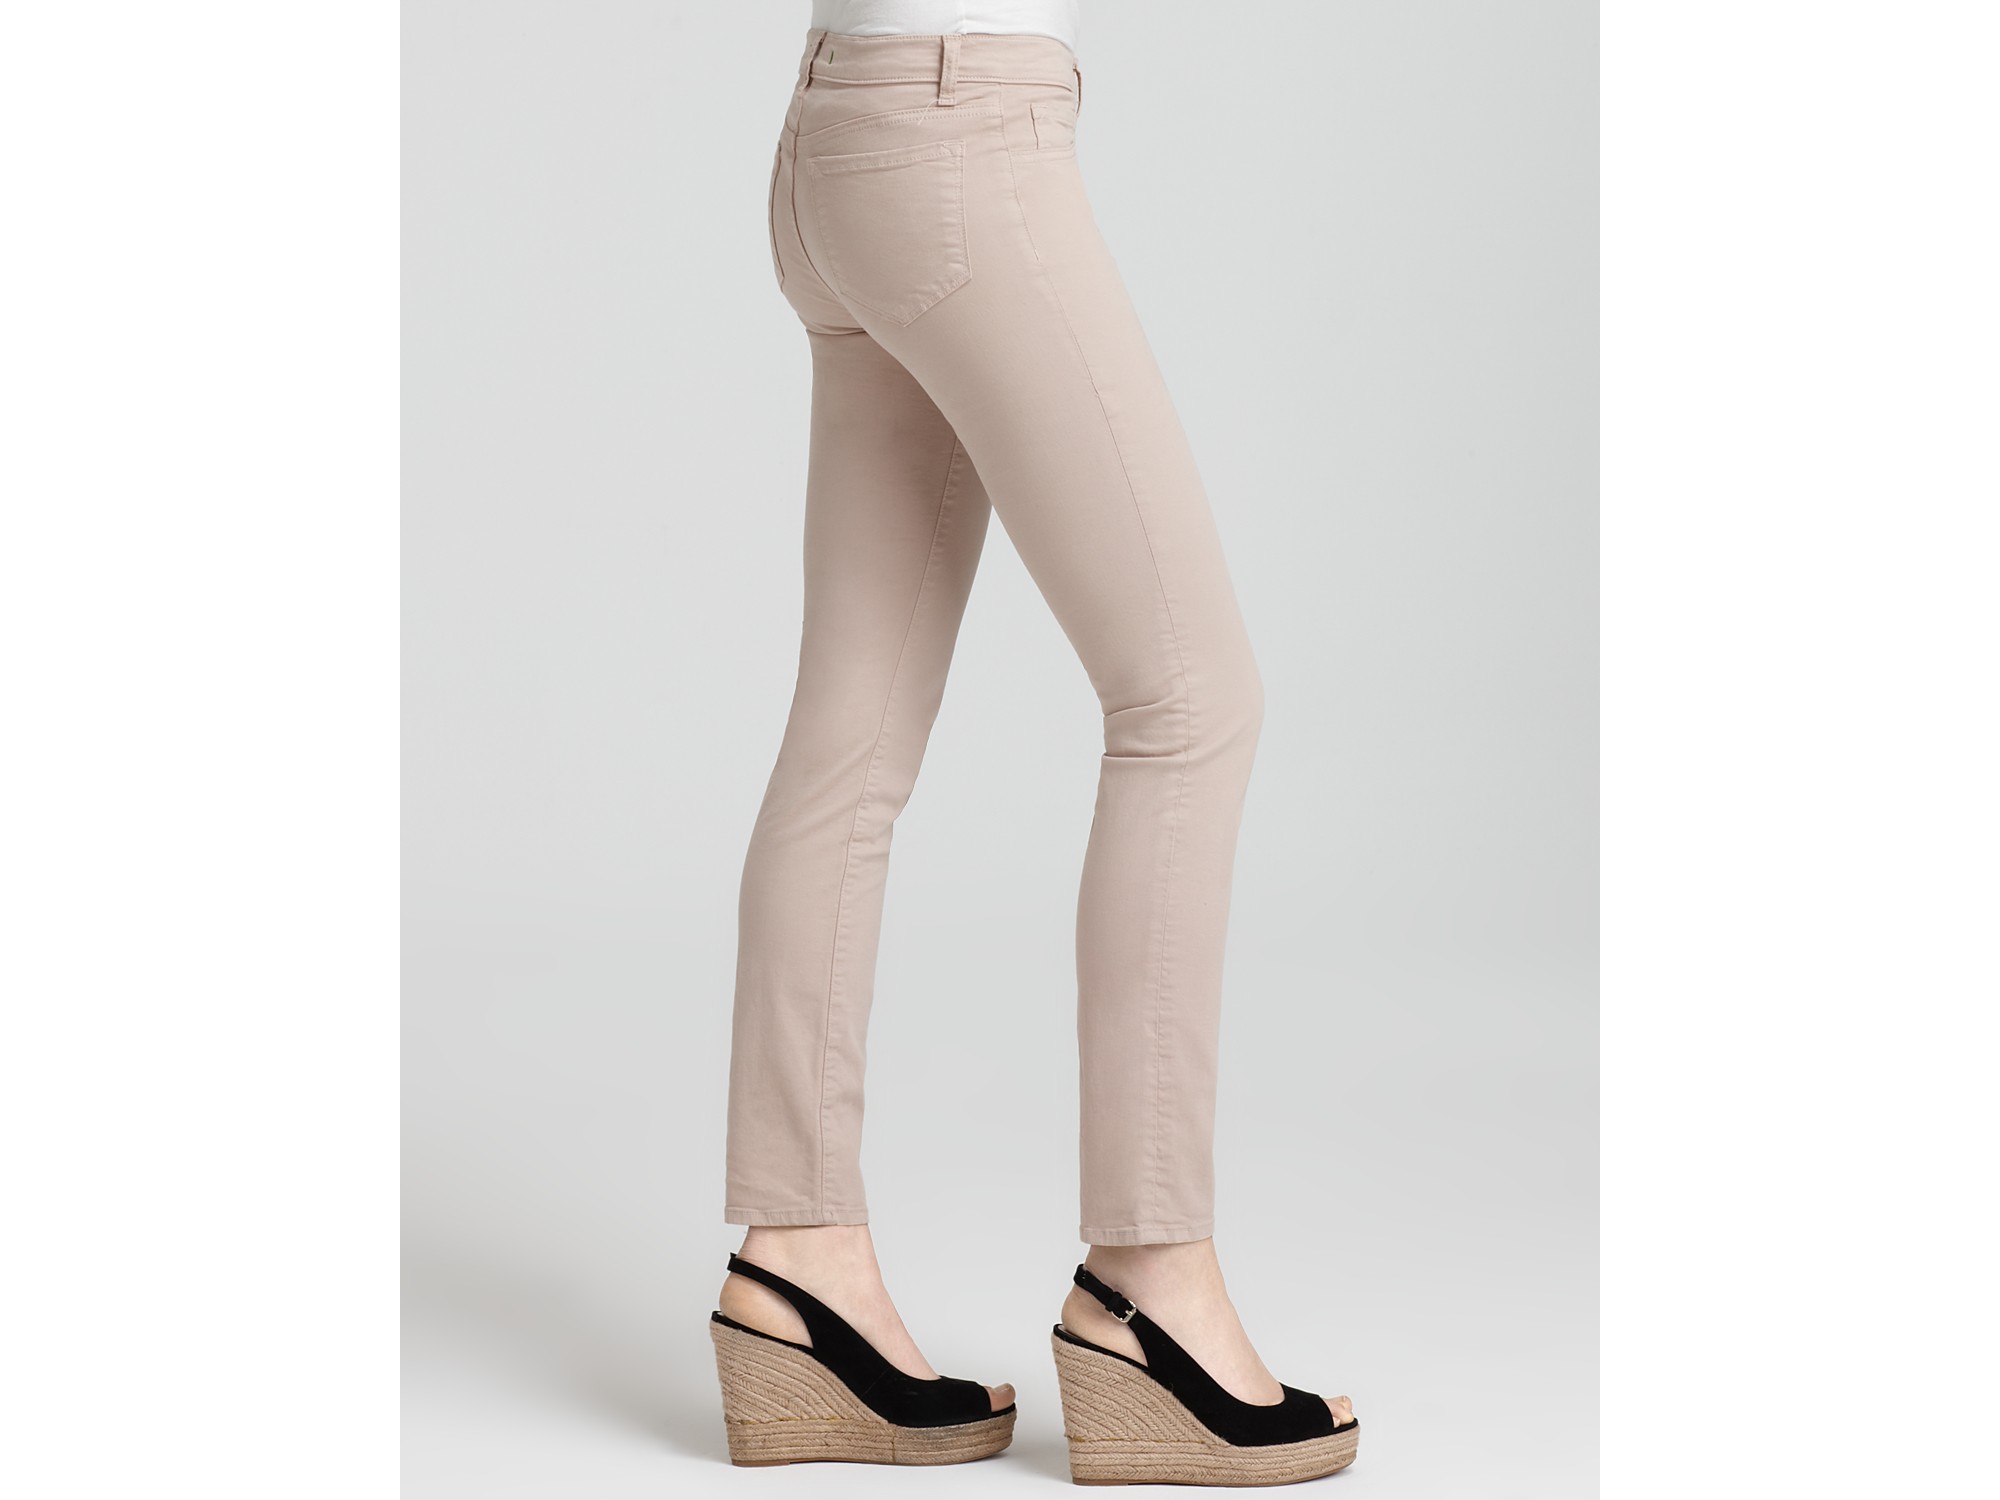 Lyst - J Brand 811 Mid Rise Luxe Twill Skinny Jeans in 